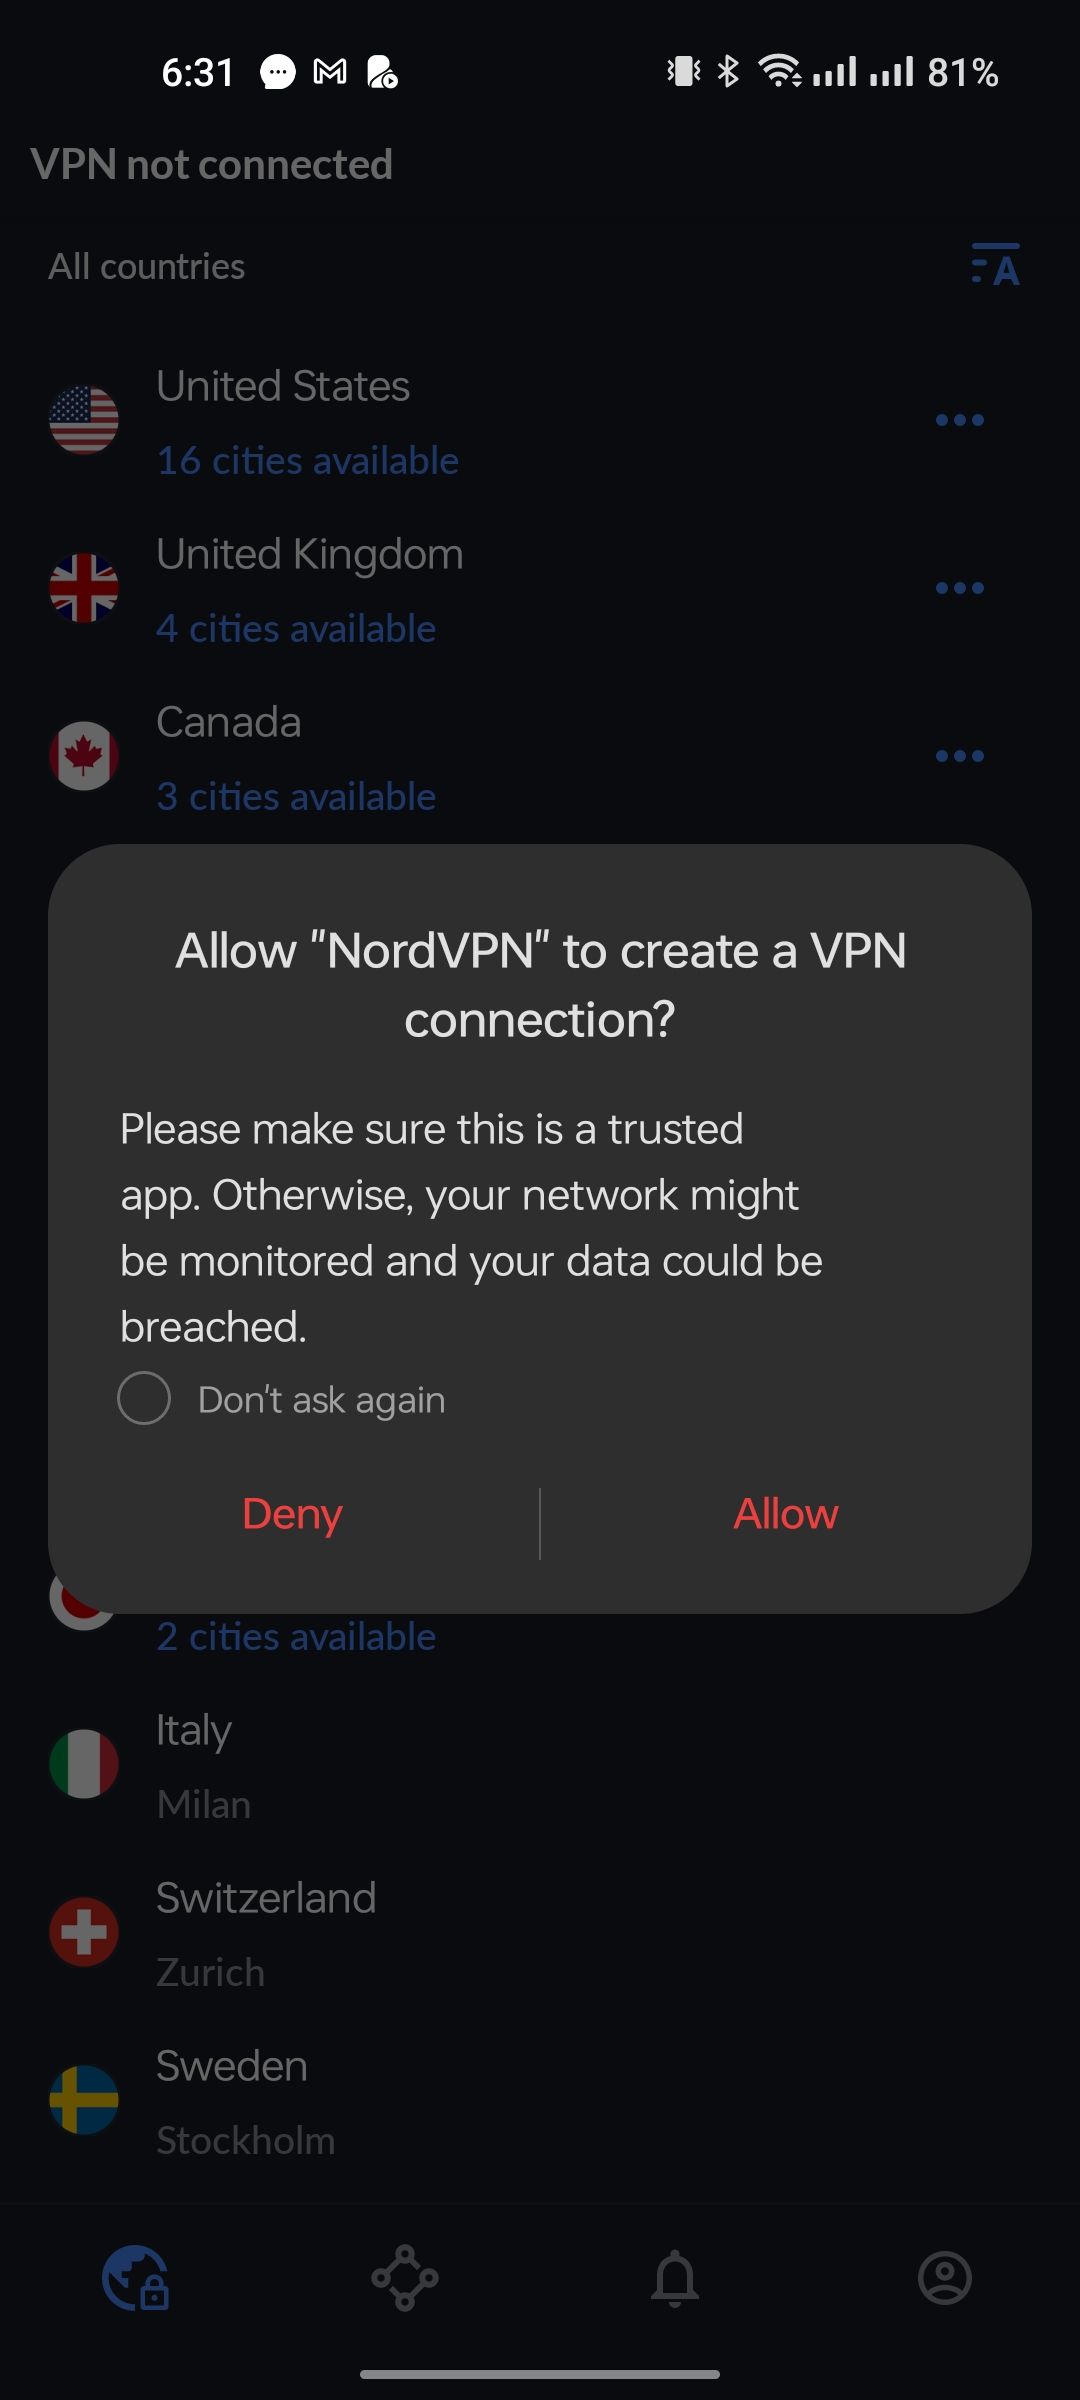 Allowing NordVPN to create a VPN Connection on Android